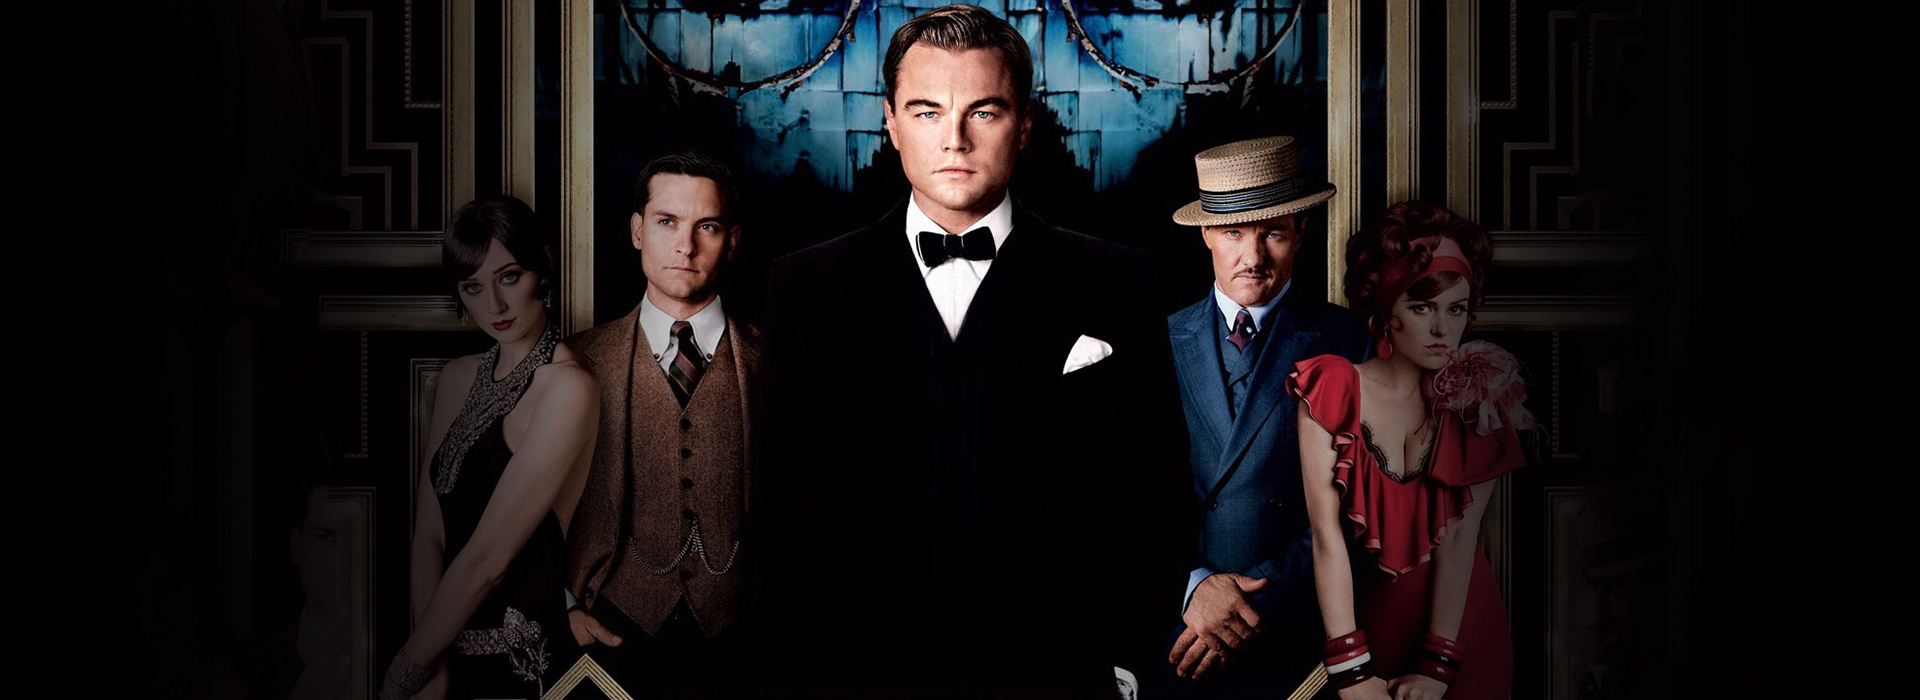 Movie poster The Great Gatsby